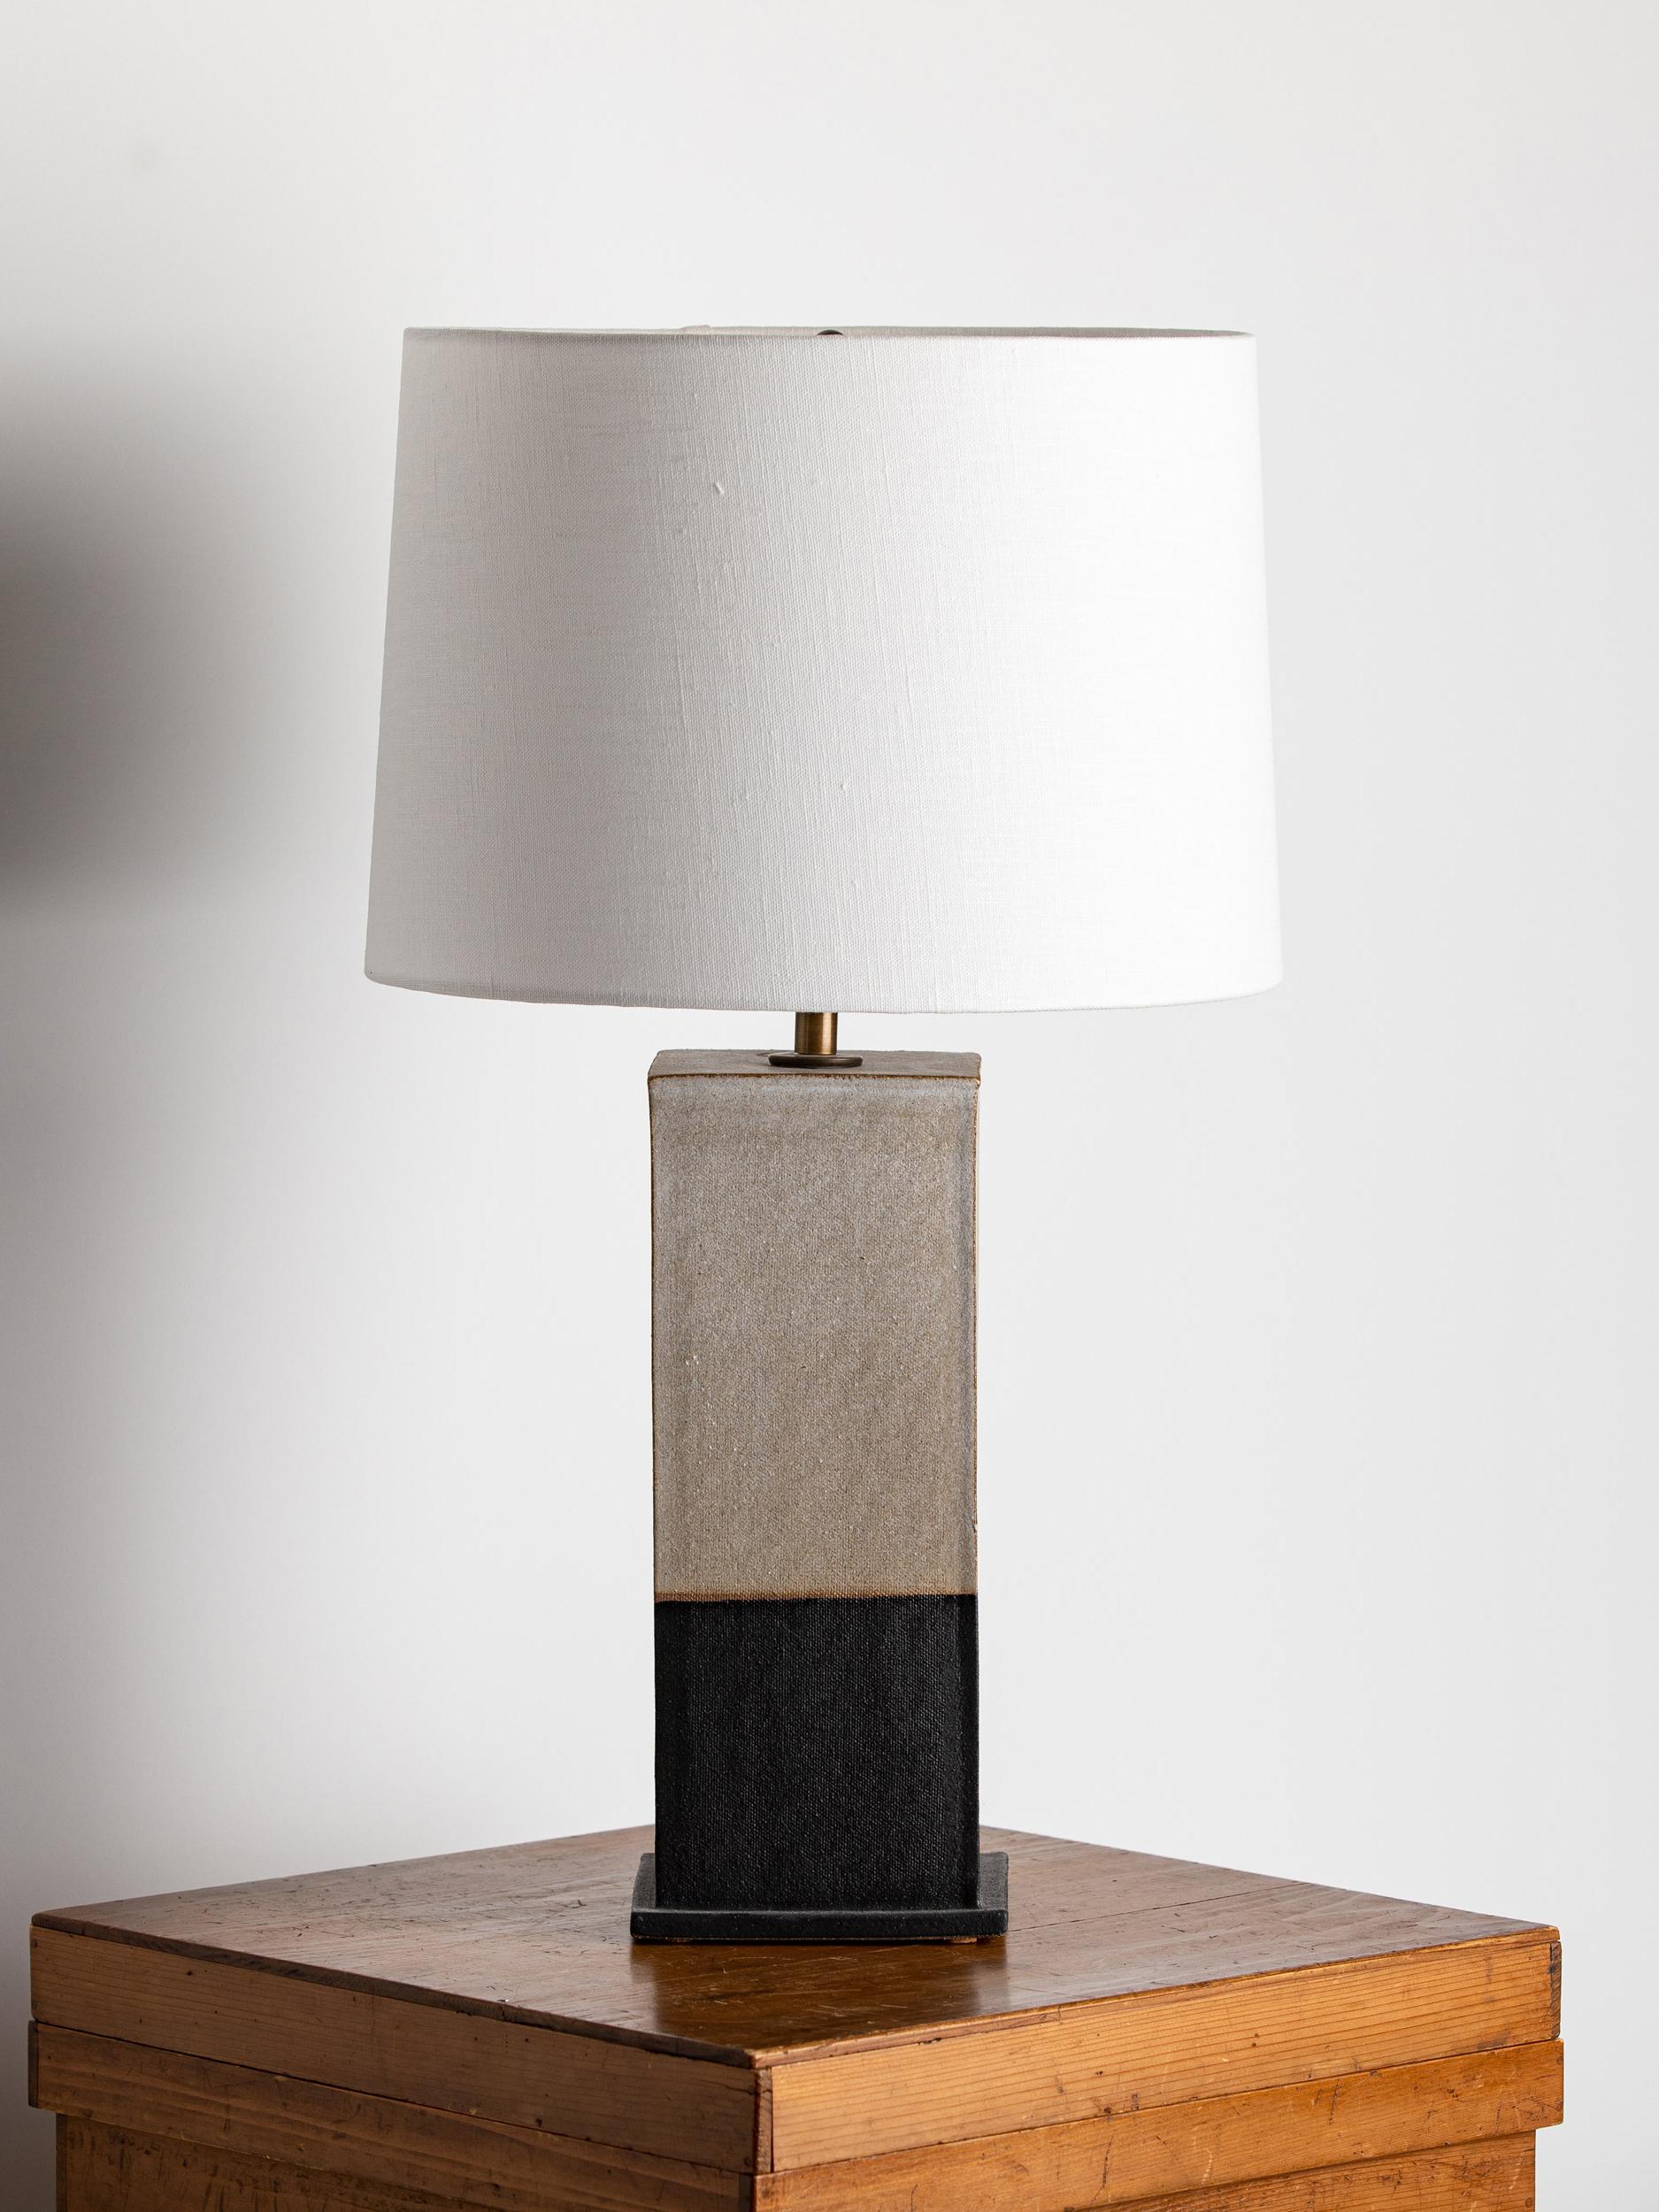 Our stoneware Sag Harbor Lamp is handcrafted using slab-construction techniques.

FINISH

- Parchment and matte-black dipped glaze
- Antique brass fittings
- Twisted black-cloth cord
- Full-range dimmer socket
- Black-linen or off-white paper